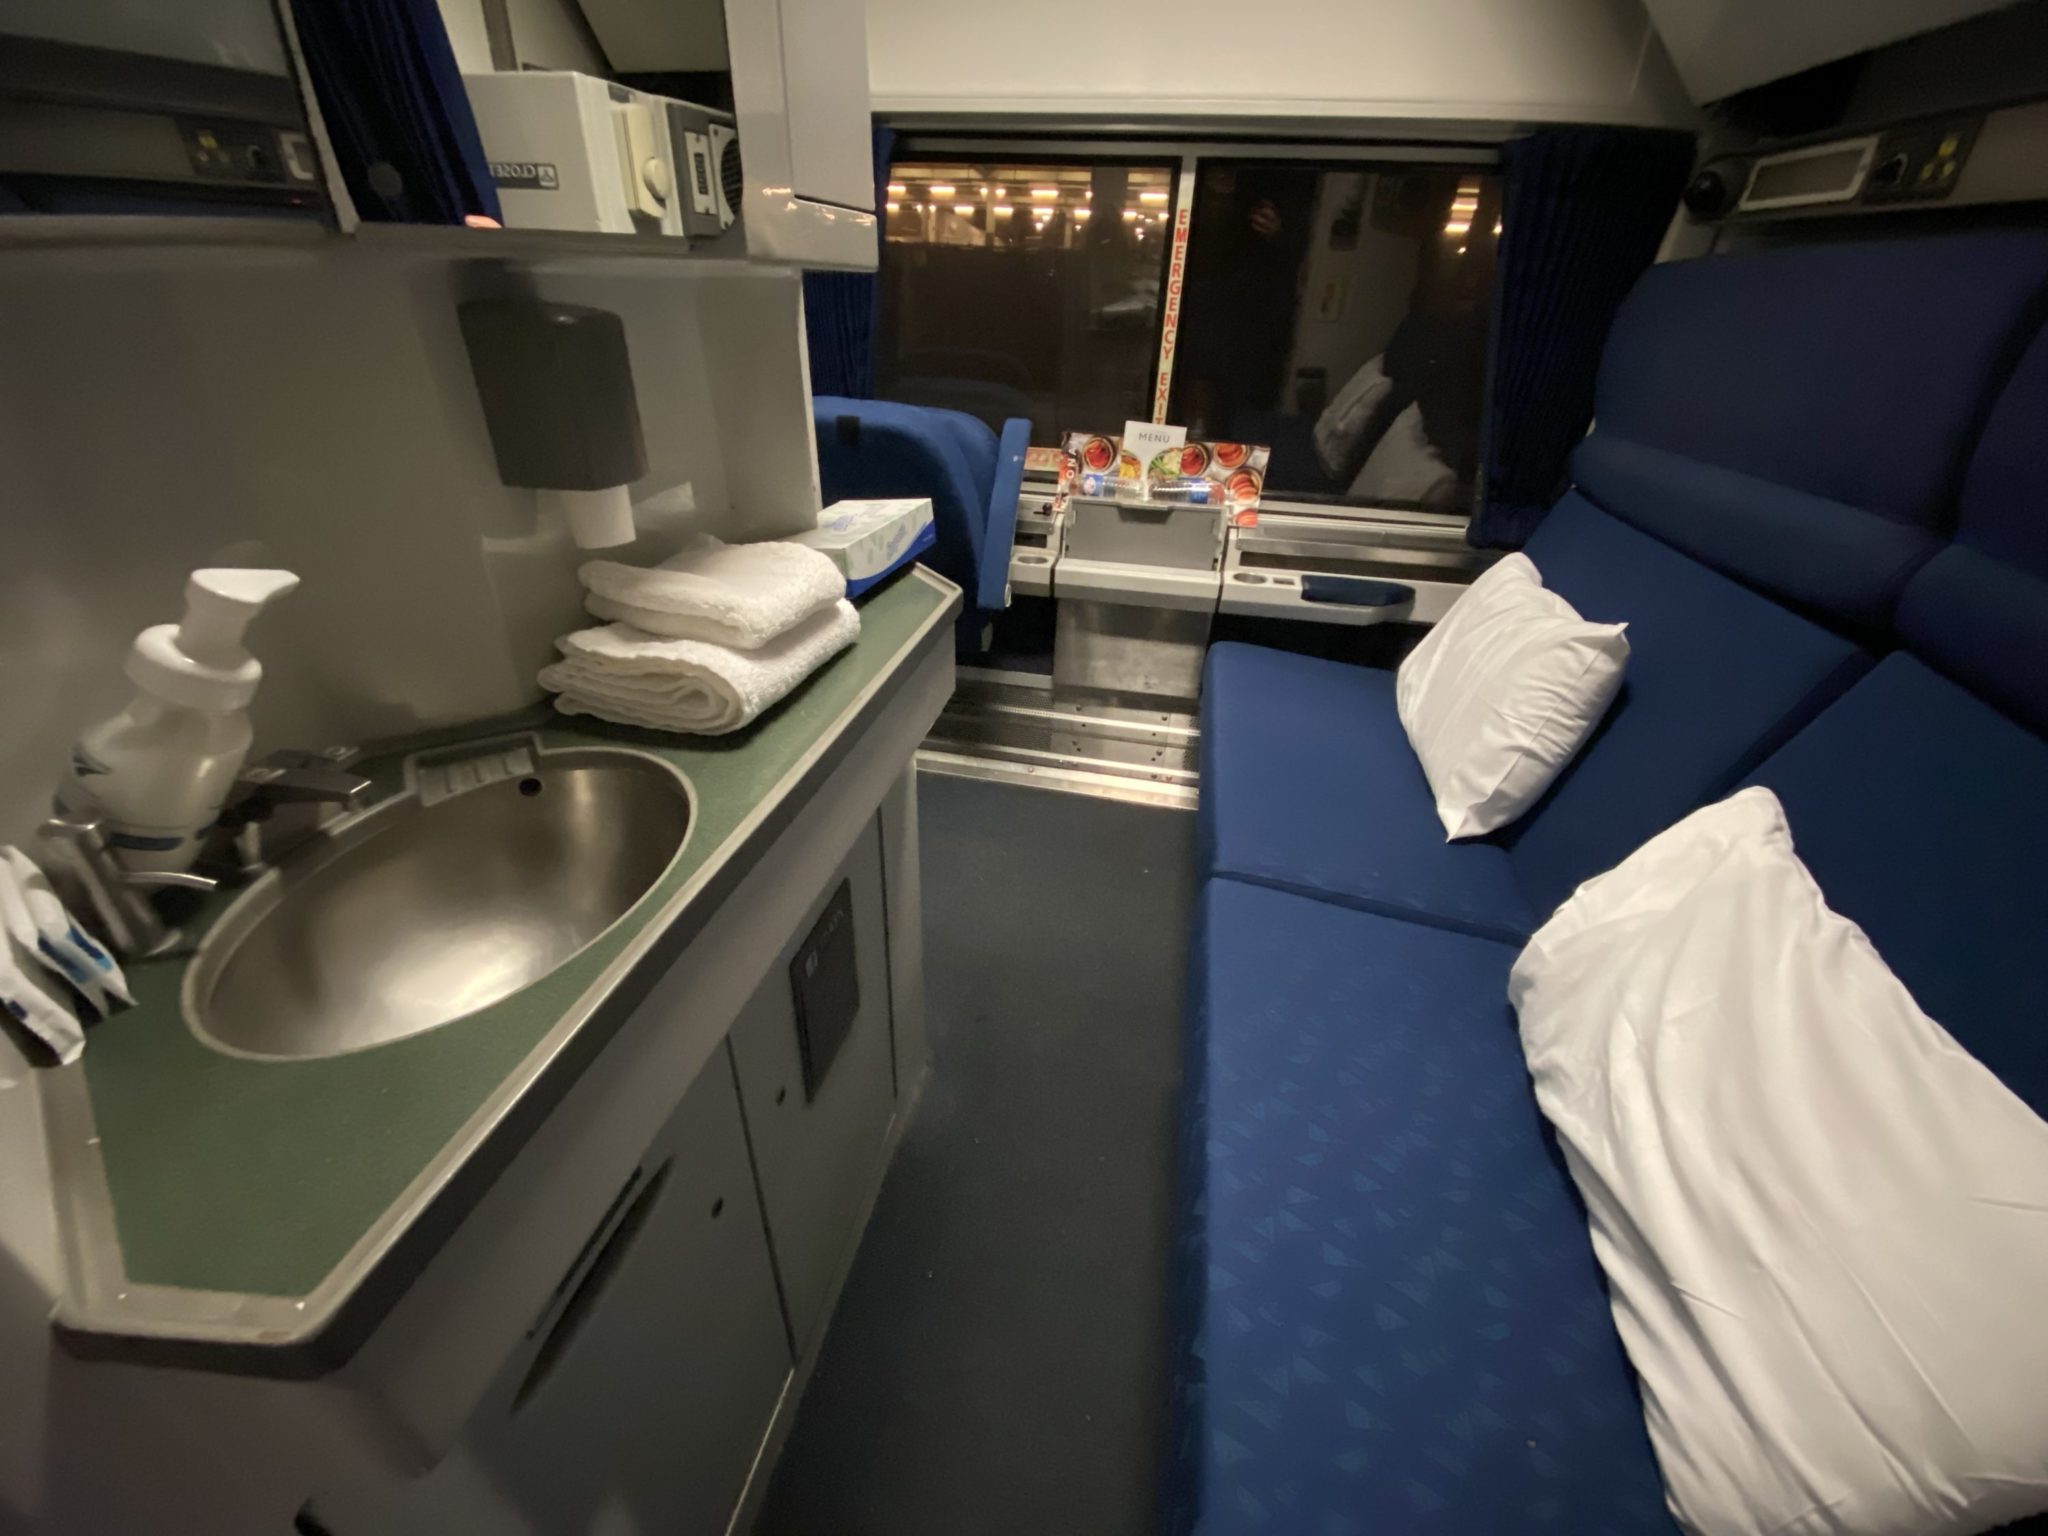 Amtrak Silver Meteor Sleeper Service Review [D.C to Miami]